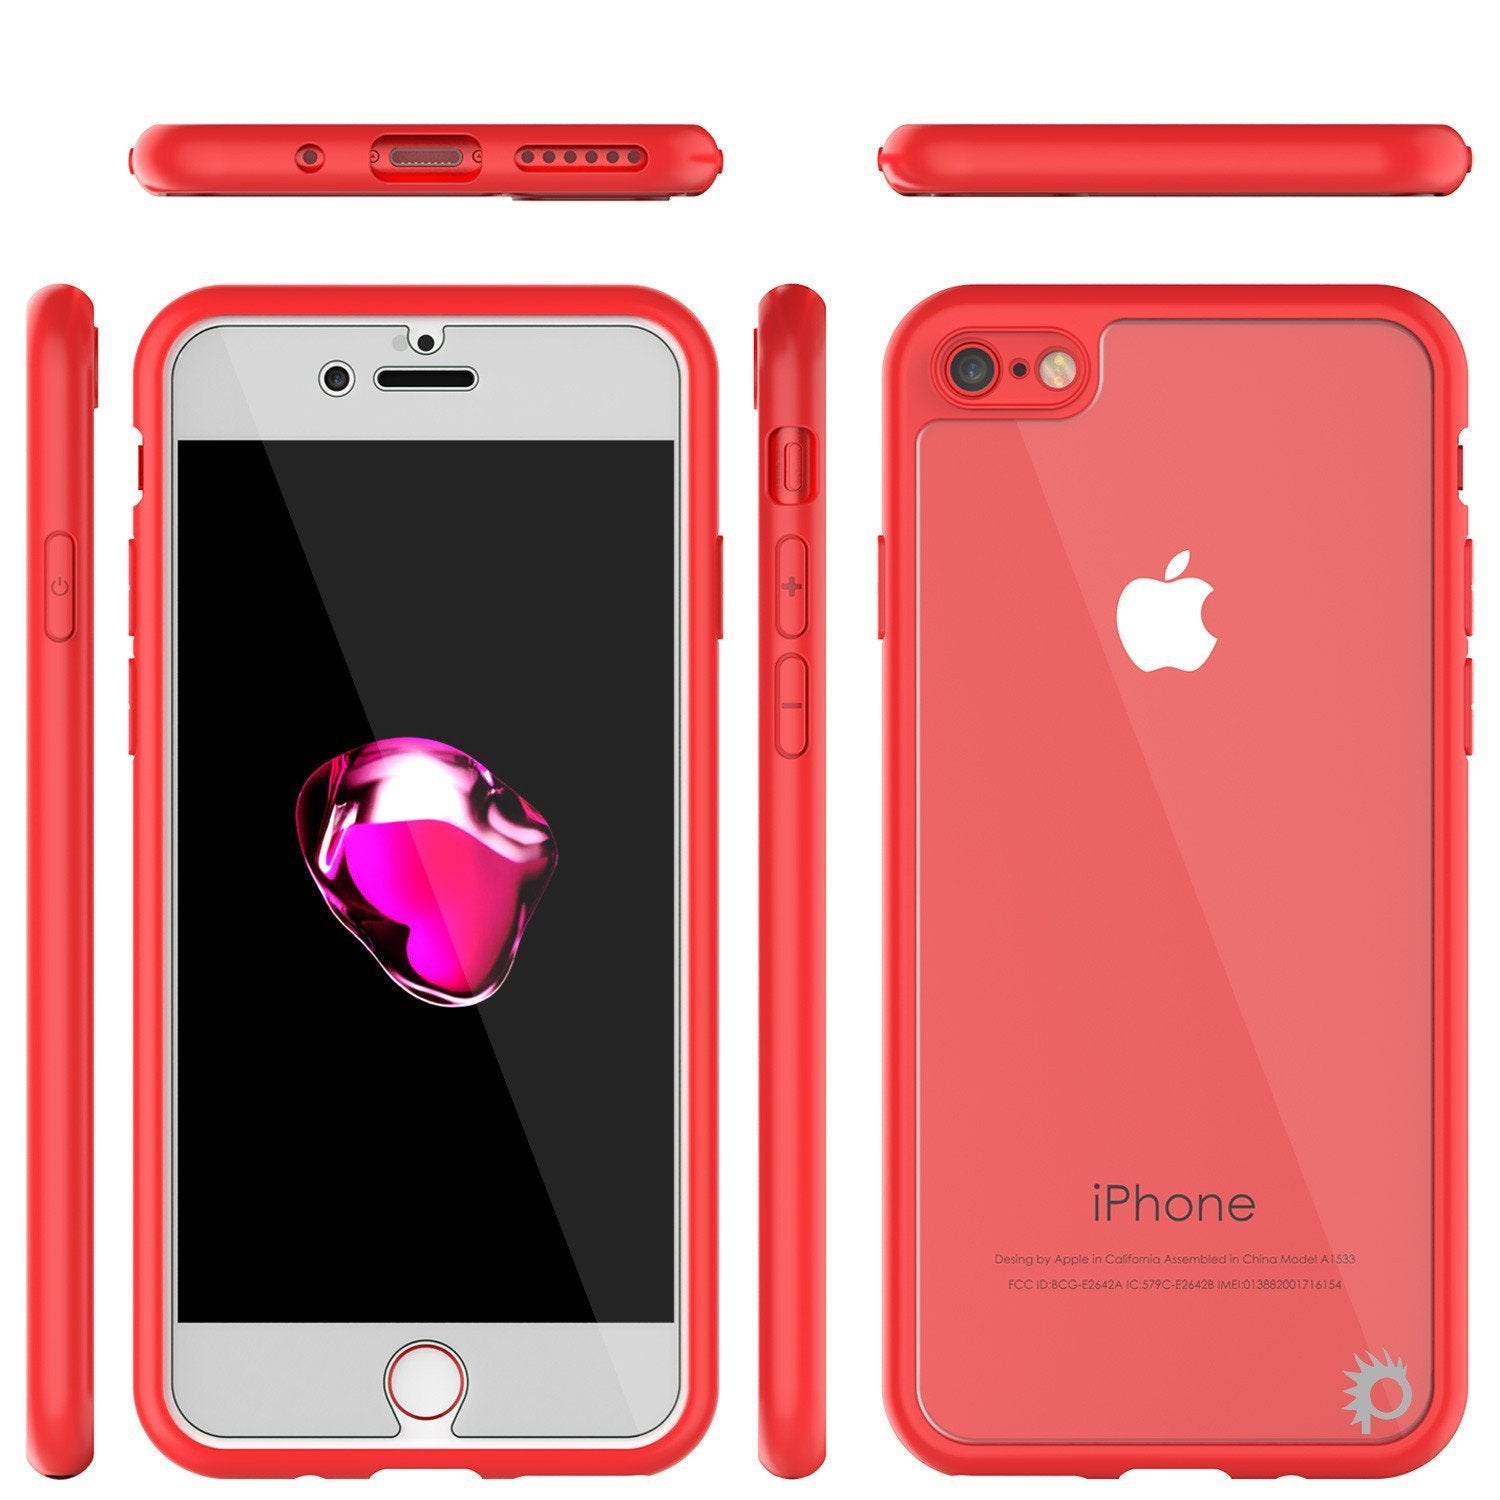 iPhone SE (4.7") Case [MASK Series] [RED] Full Body Hybrid Dual Layer TPU Cover W/ protective Tempered Glass Screen Protector